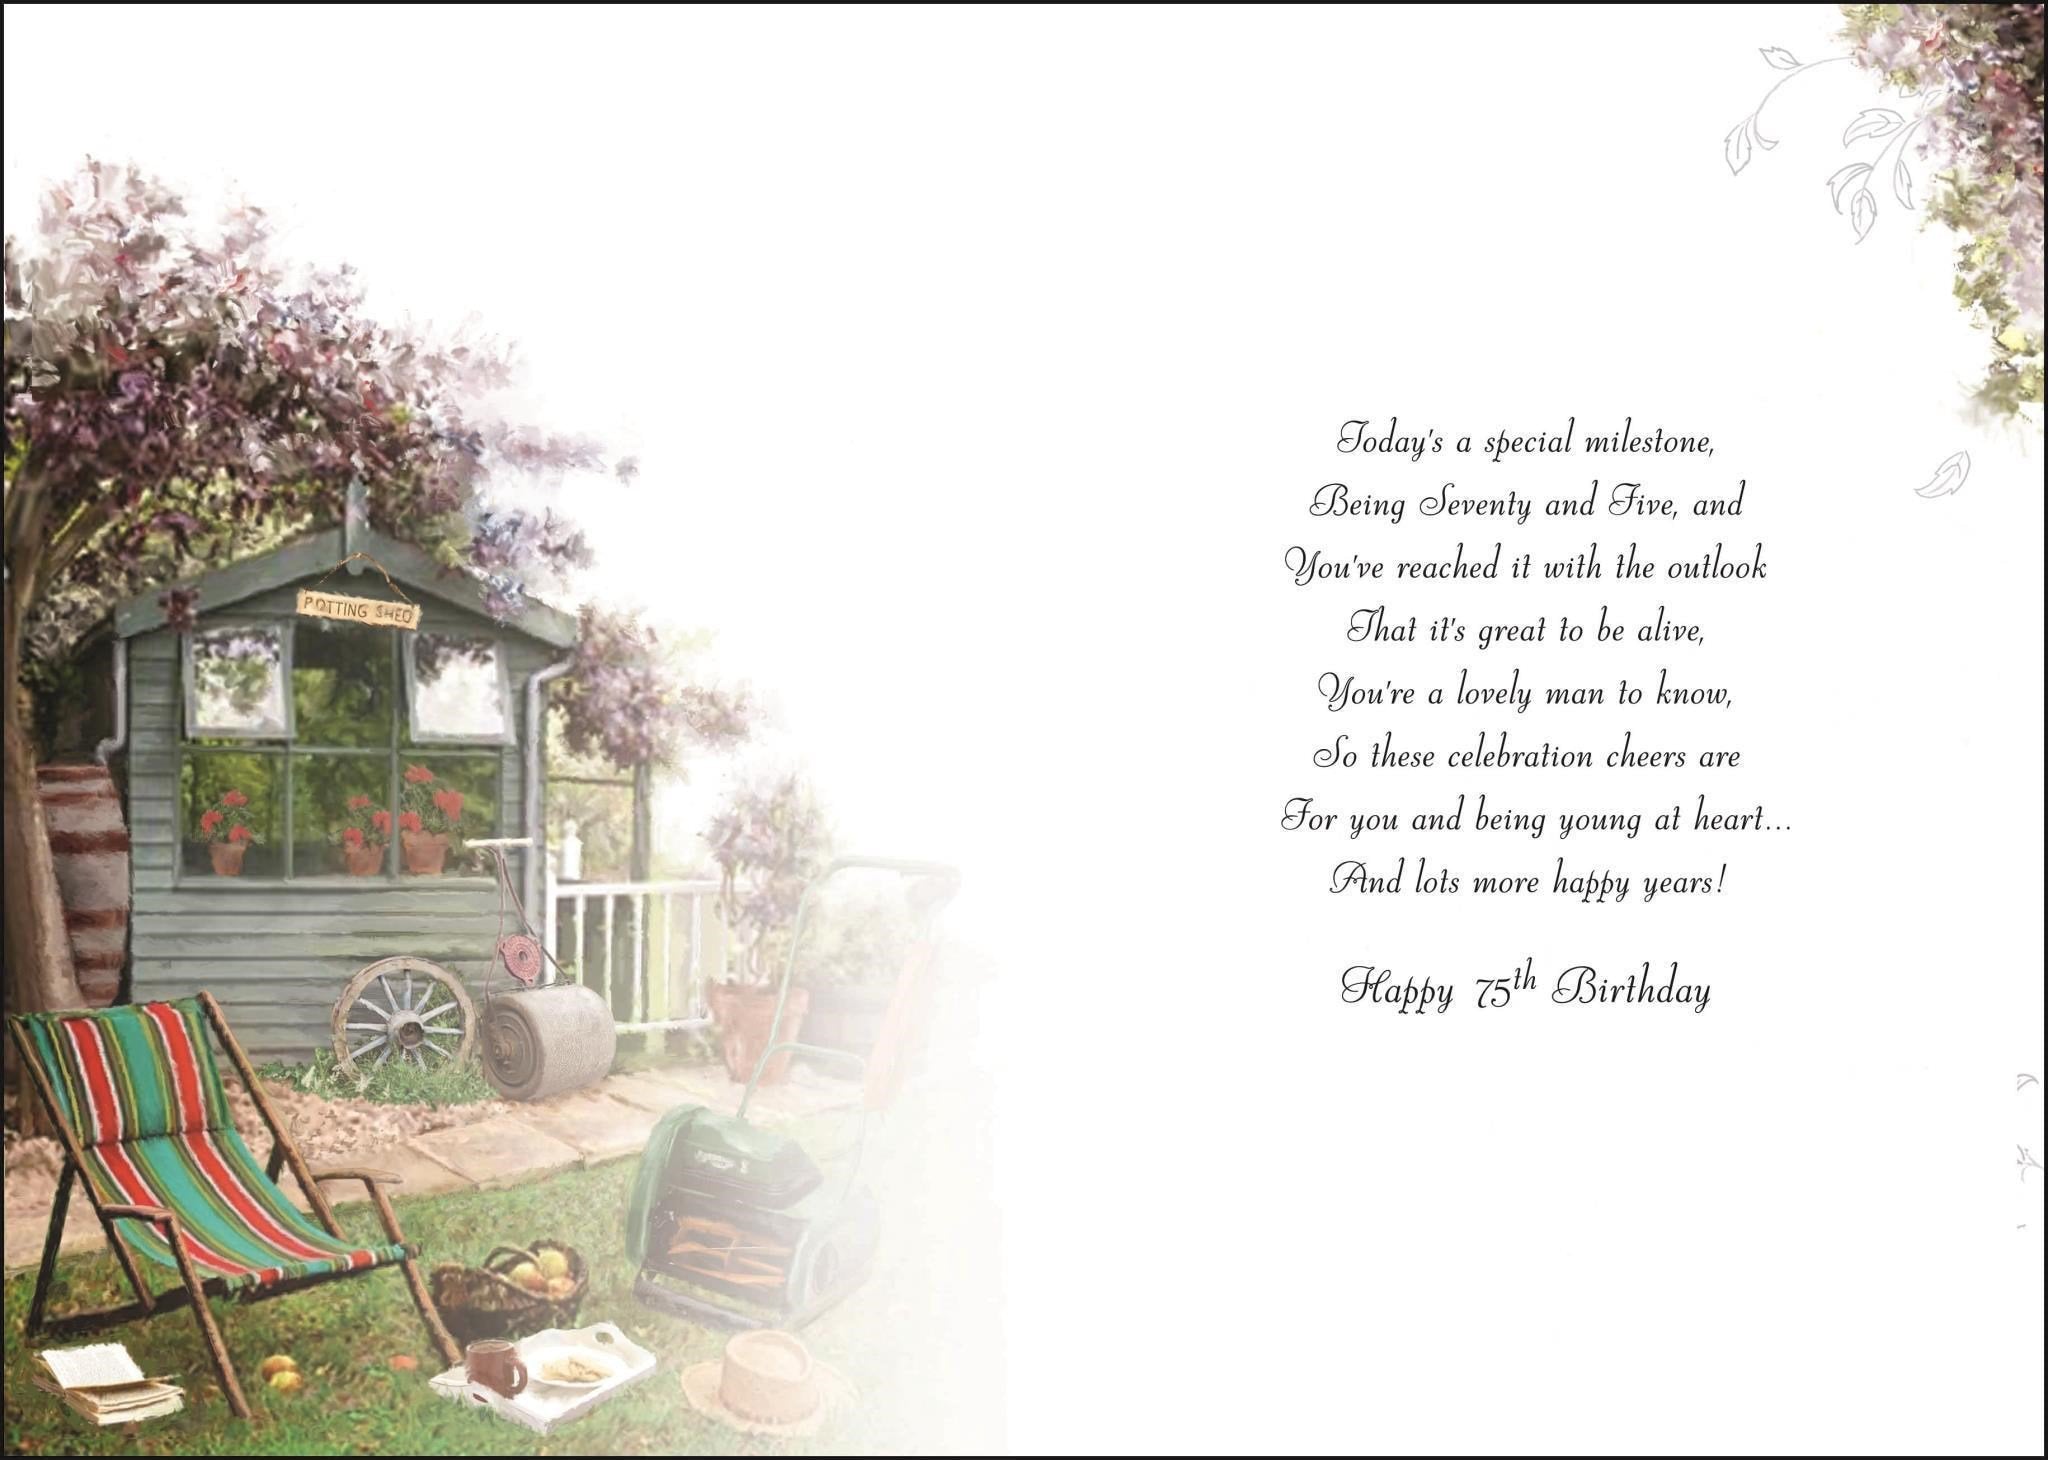 Inside of 75th Birthday Garden Shed Greetings Card